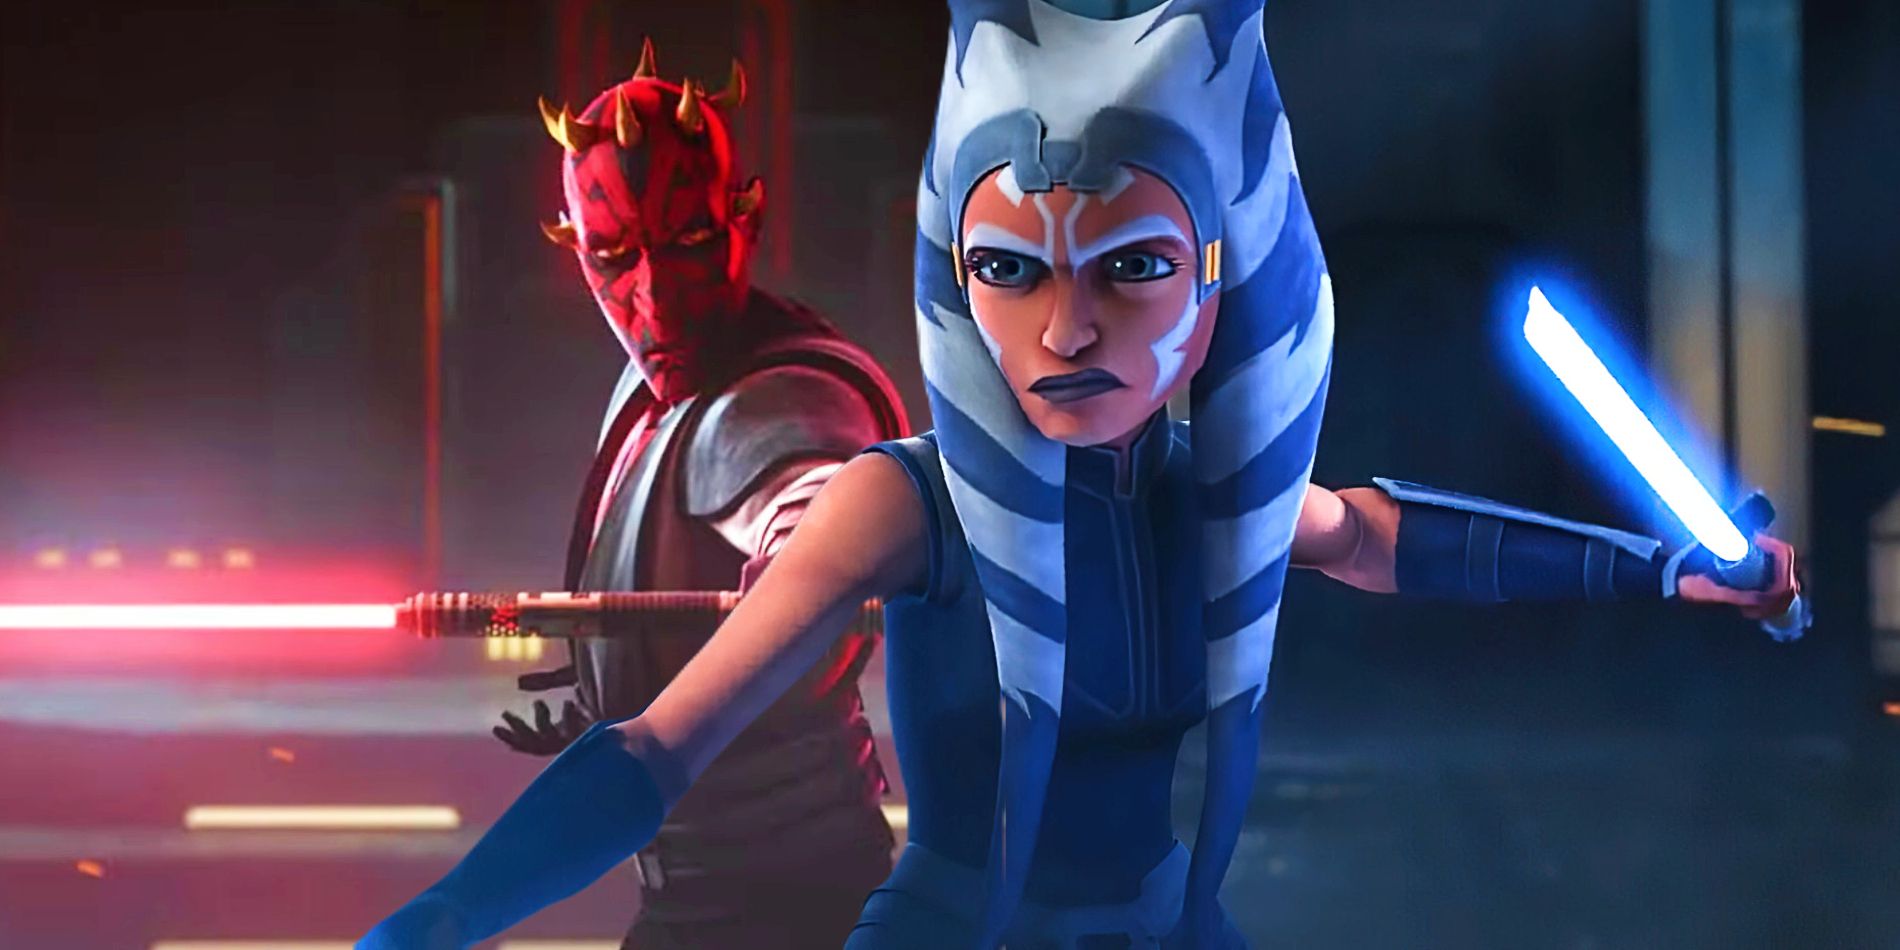 What If Ahsoka Had Joined Darth Maul? Plotting An Alternative Star Wars Timeline With Two New Sith